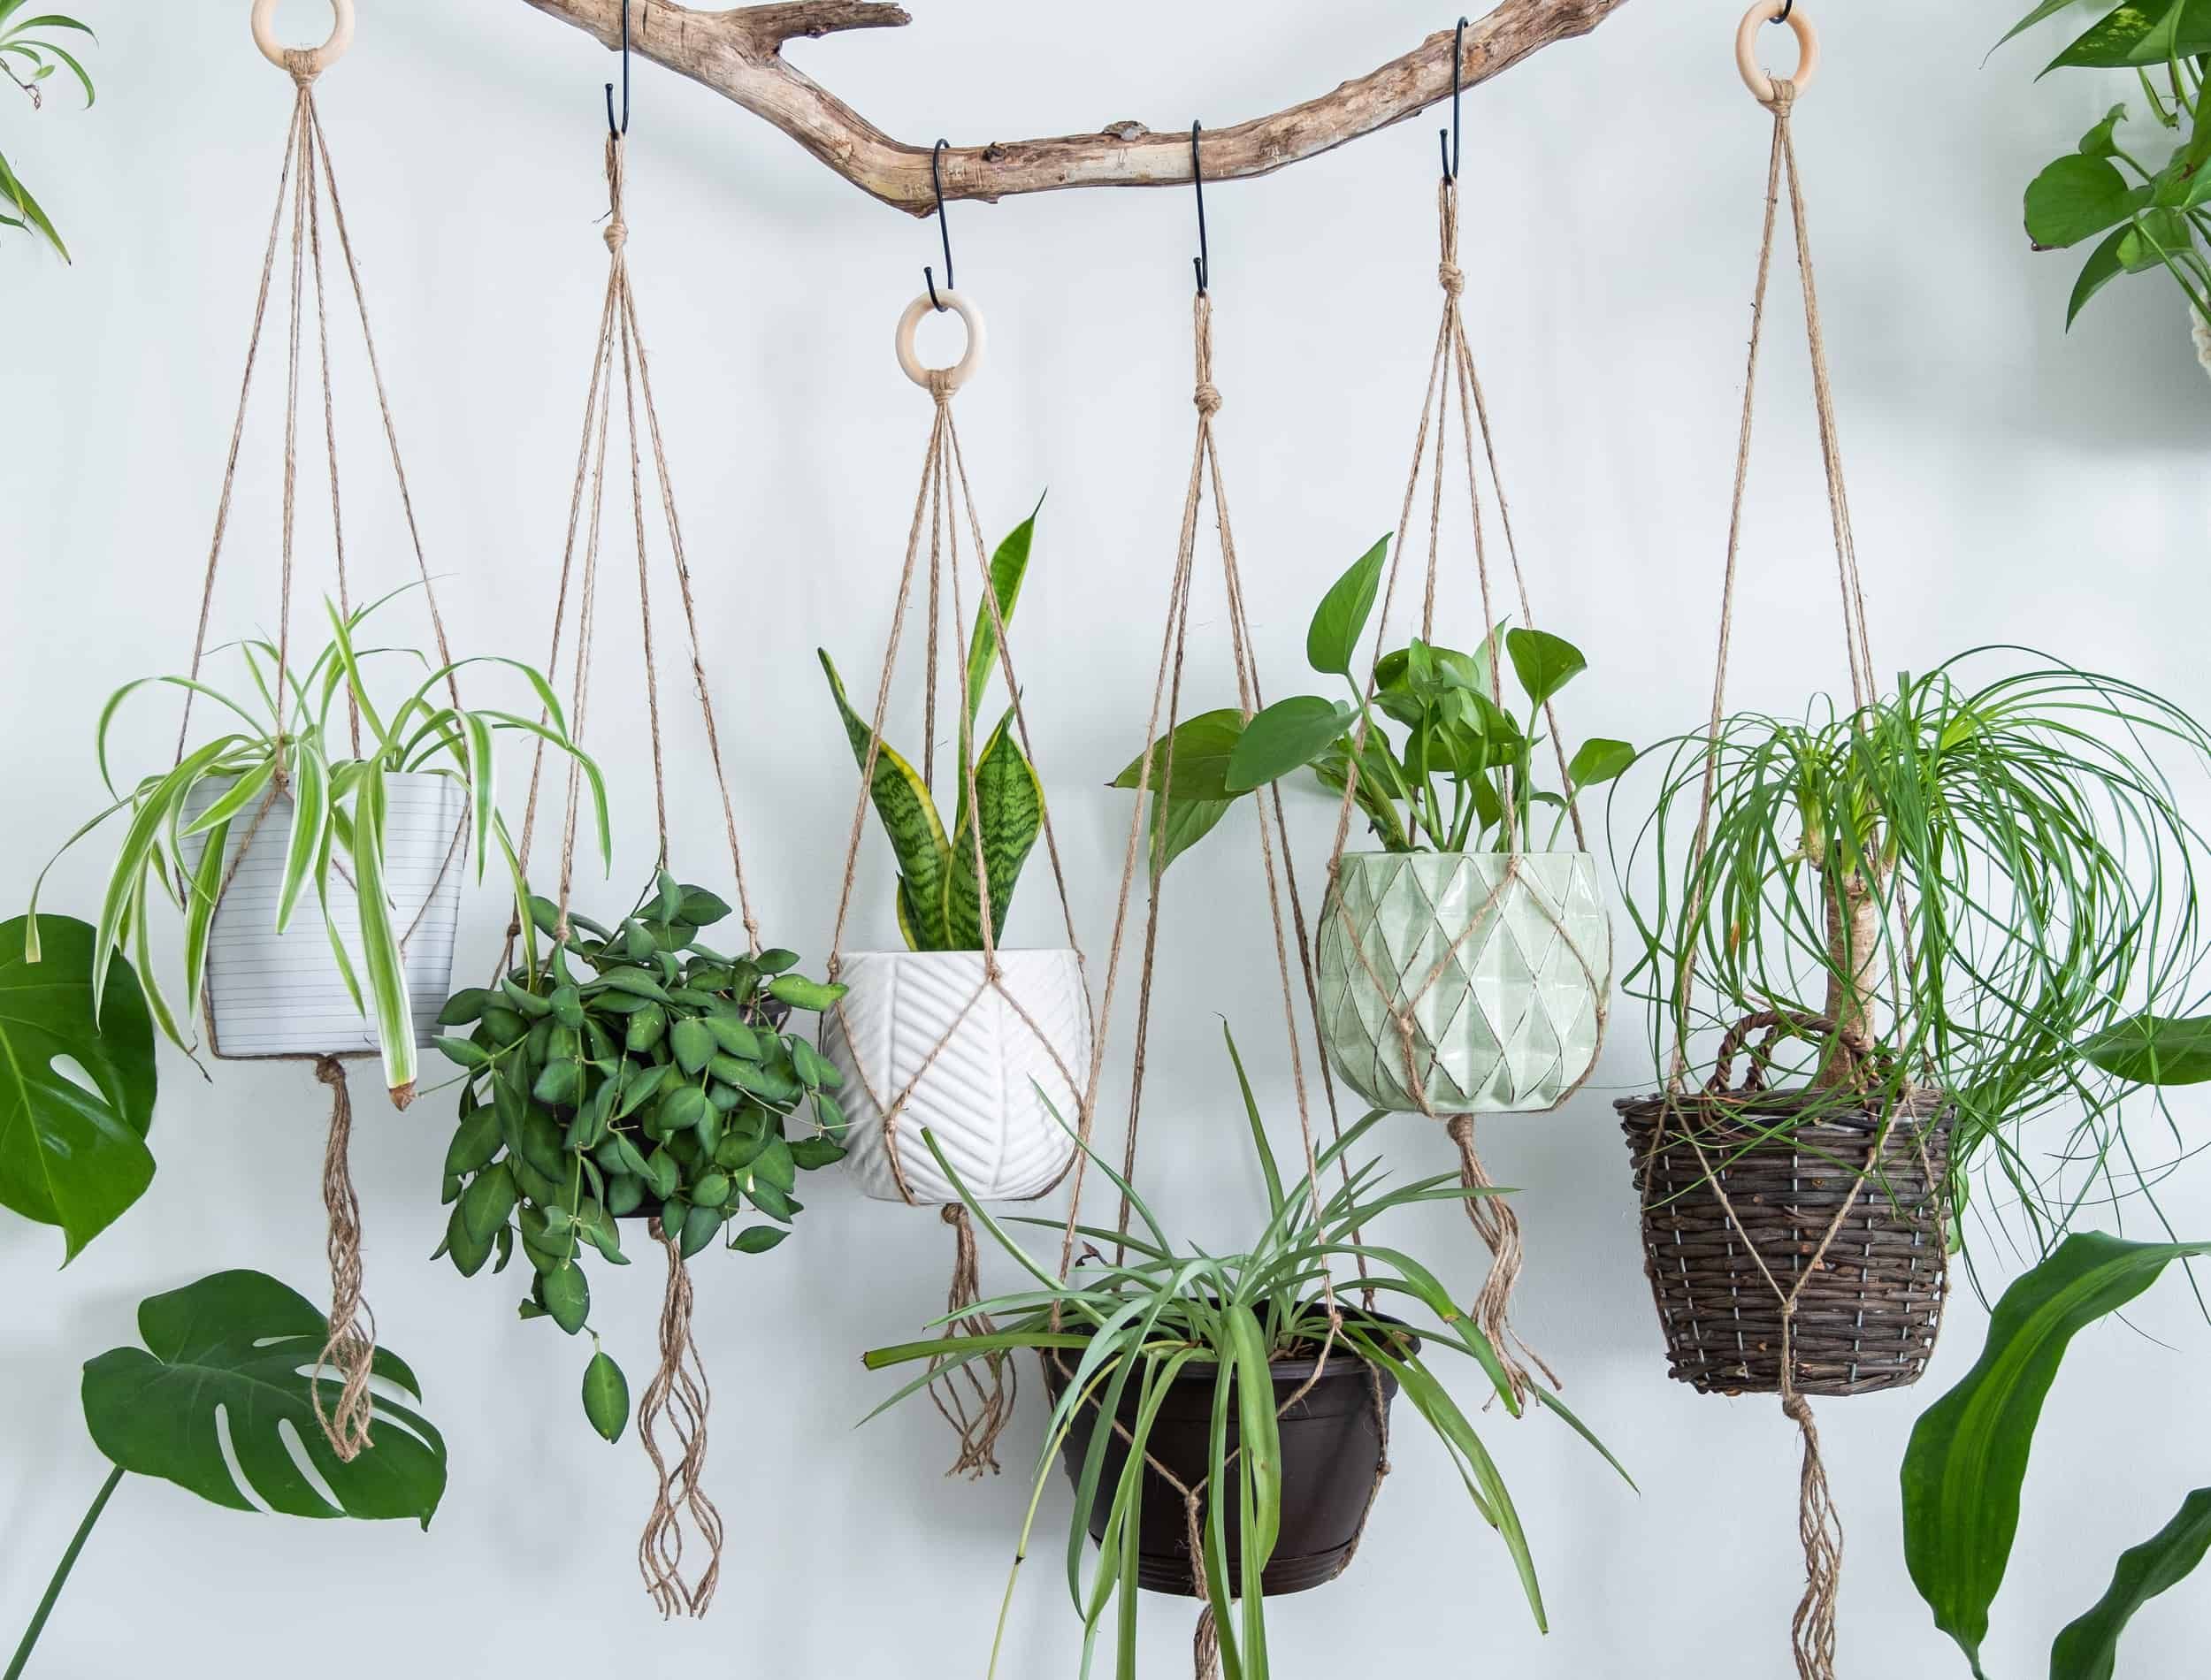 Six jute twine macrame plant hangers are hanging from a driftwood branch.